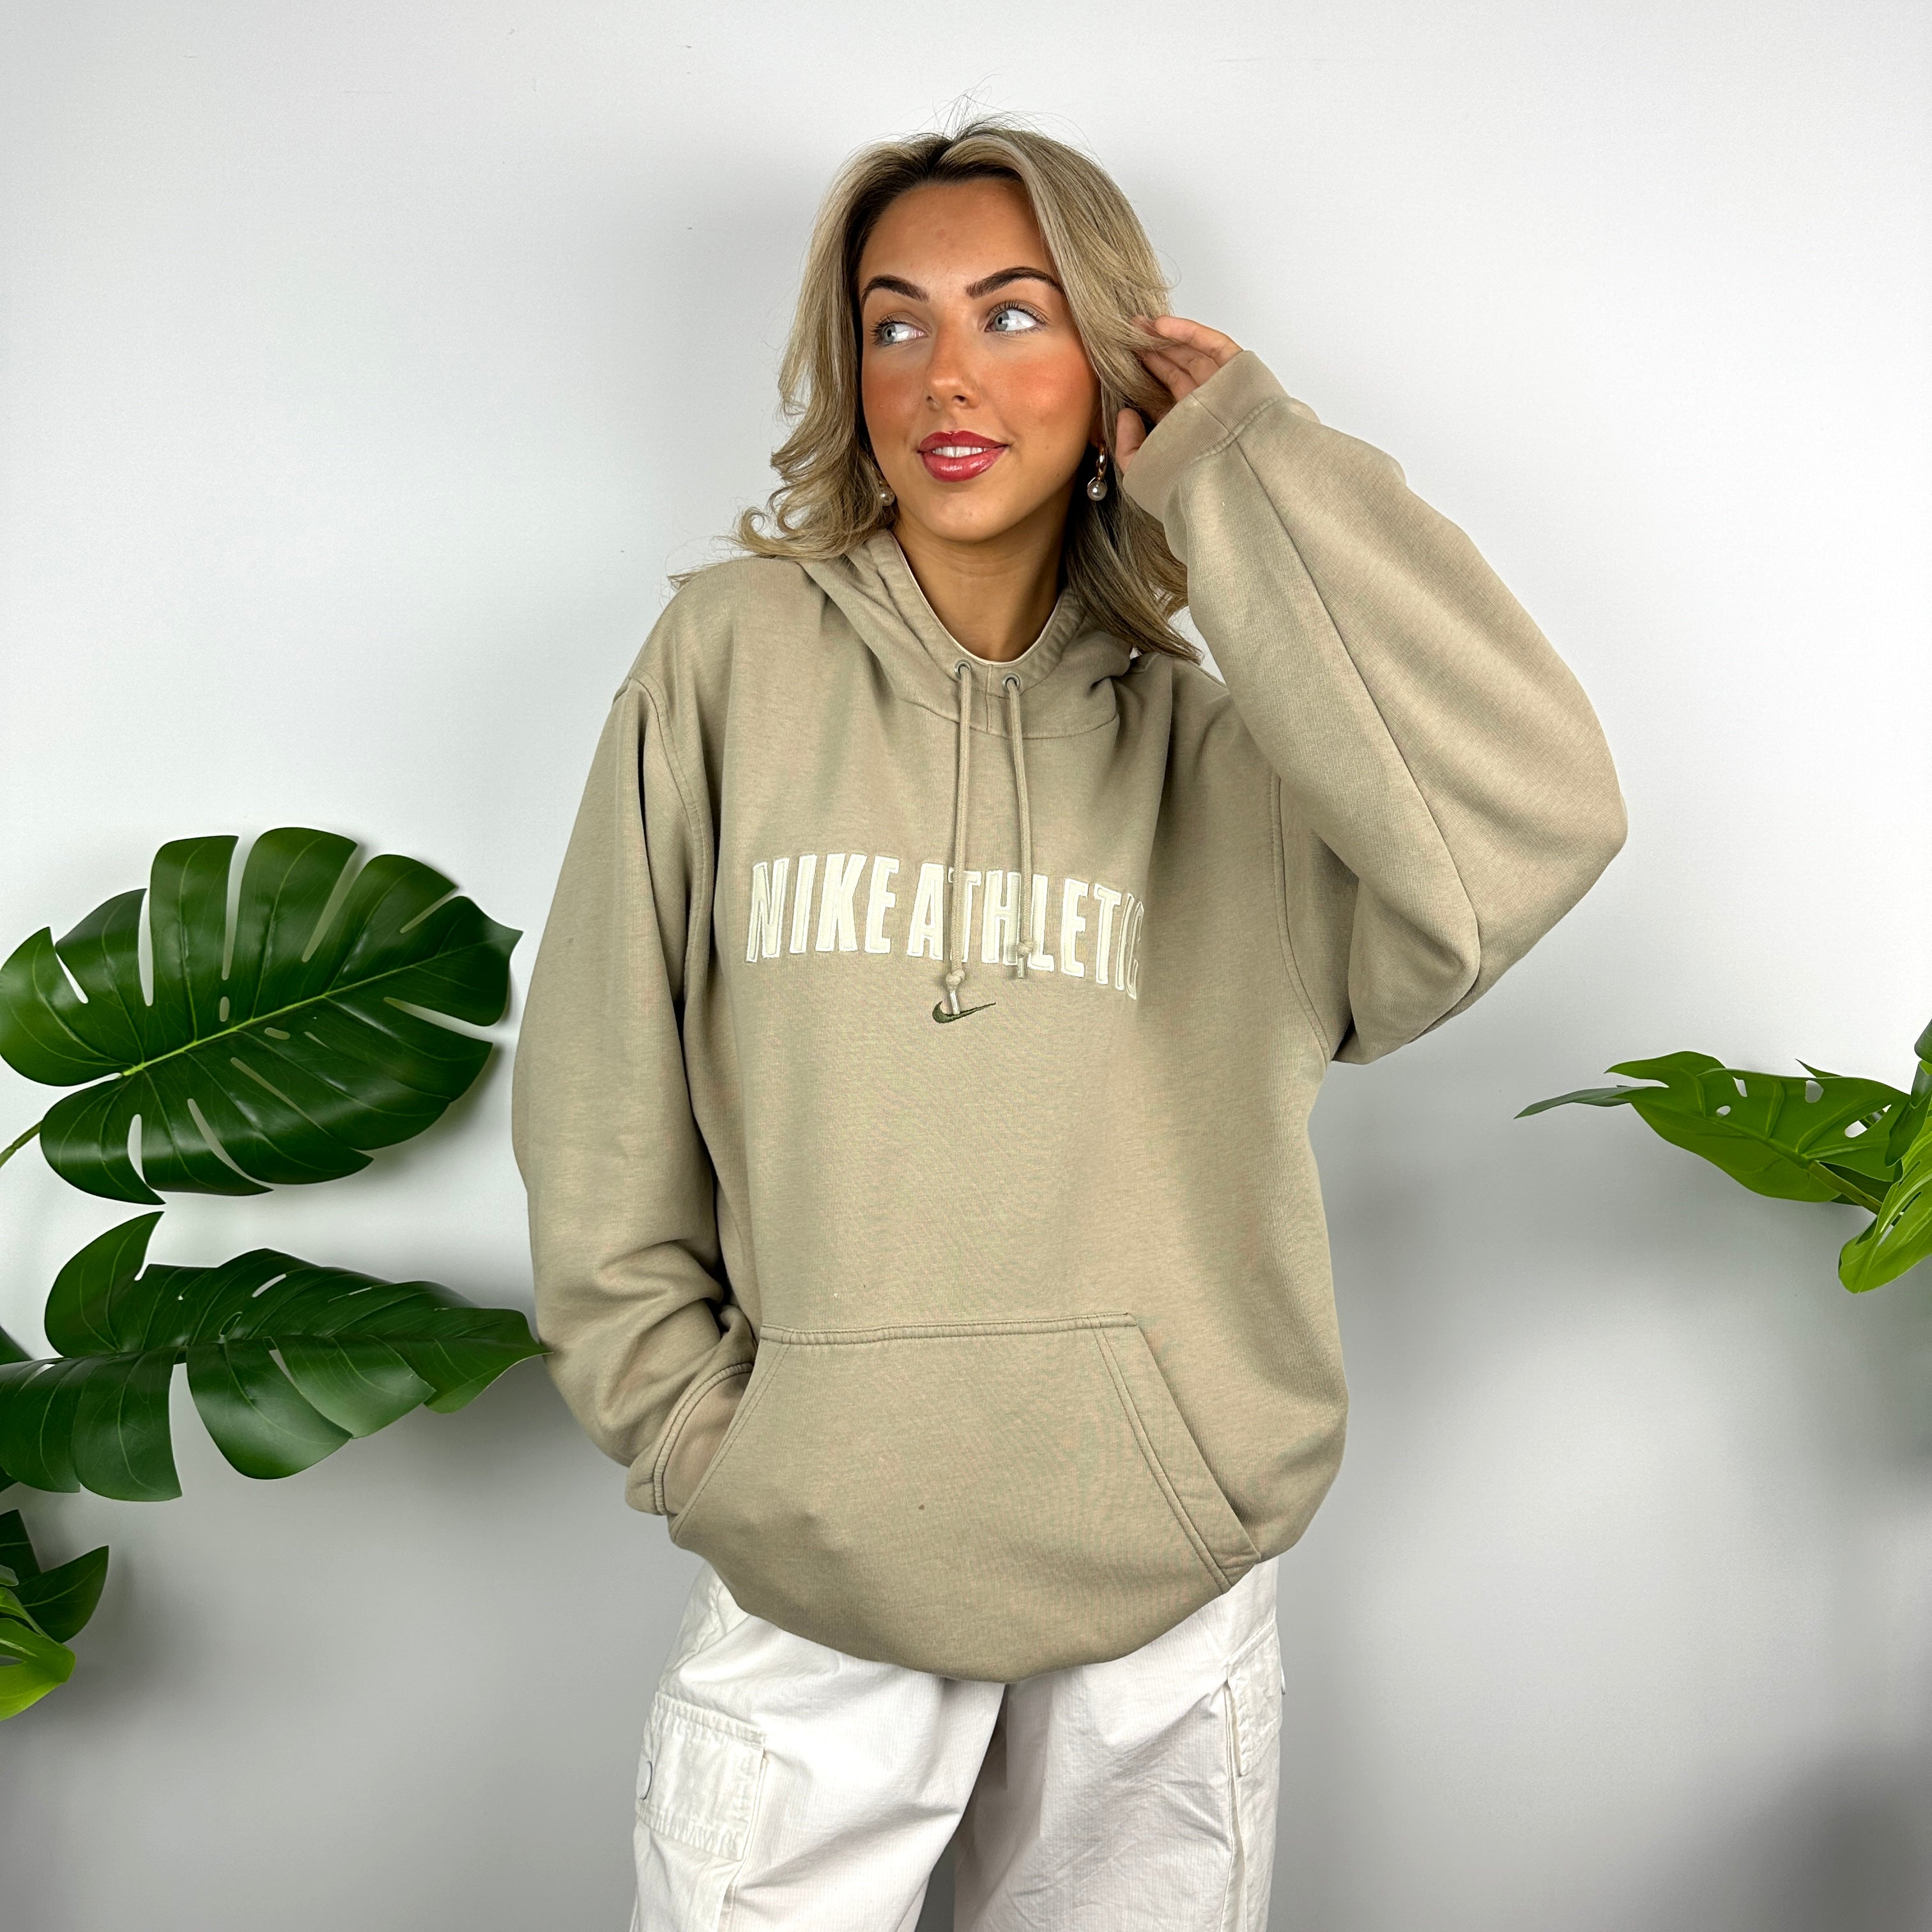 Nike Athletic Beige Embroidered Spell Out Hoodie (L)